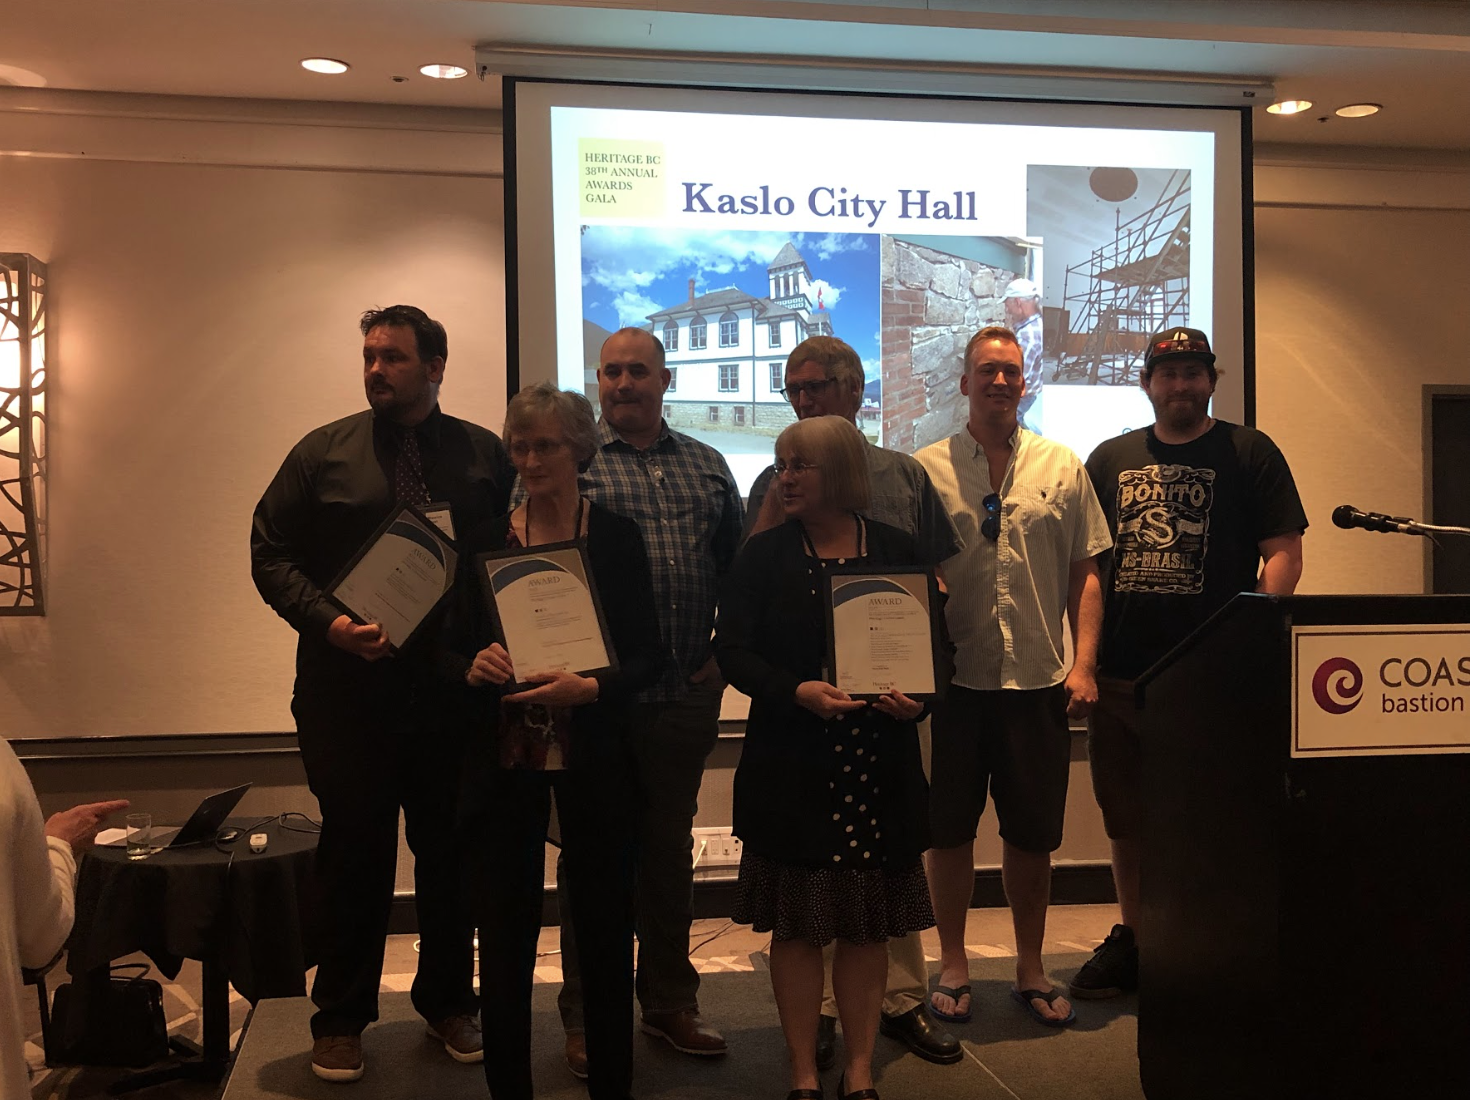 Heritage BC award winners at 2019 conference posing with certificates in front of a slideshow